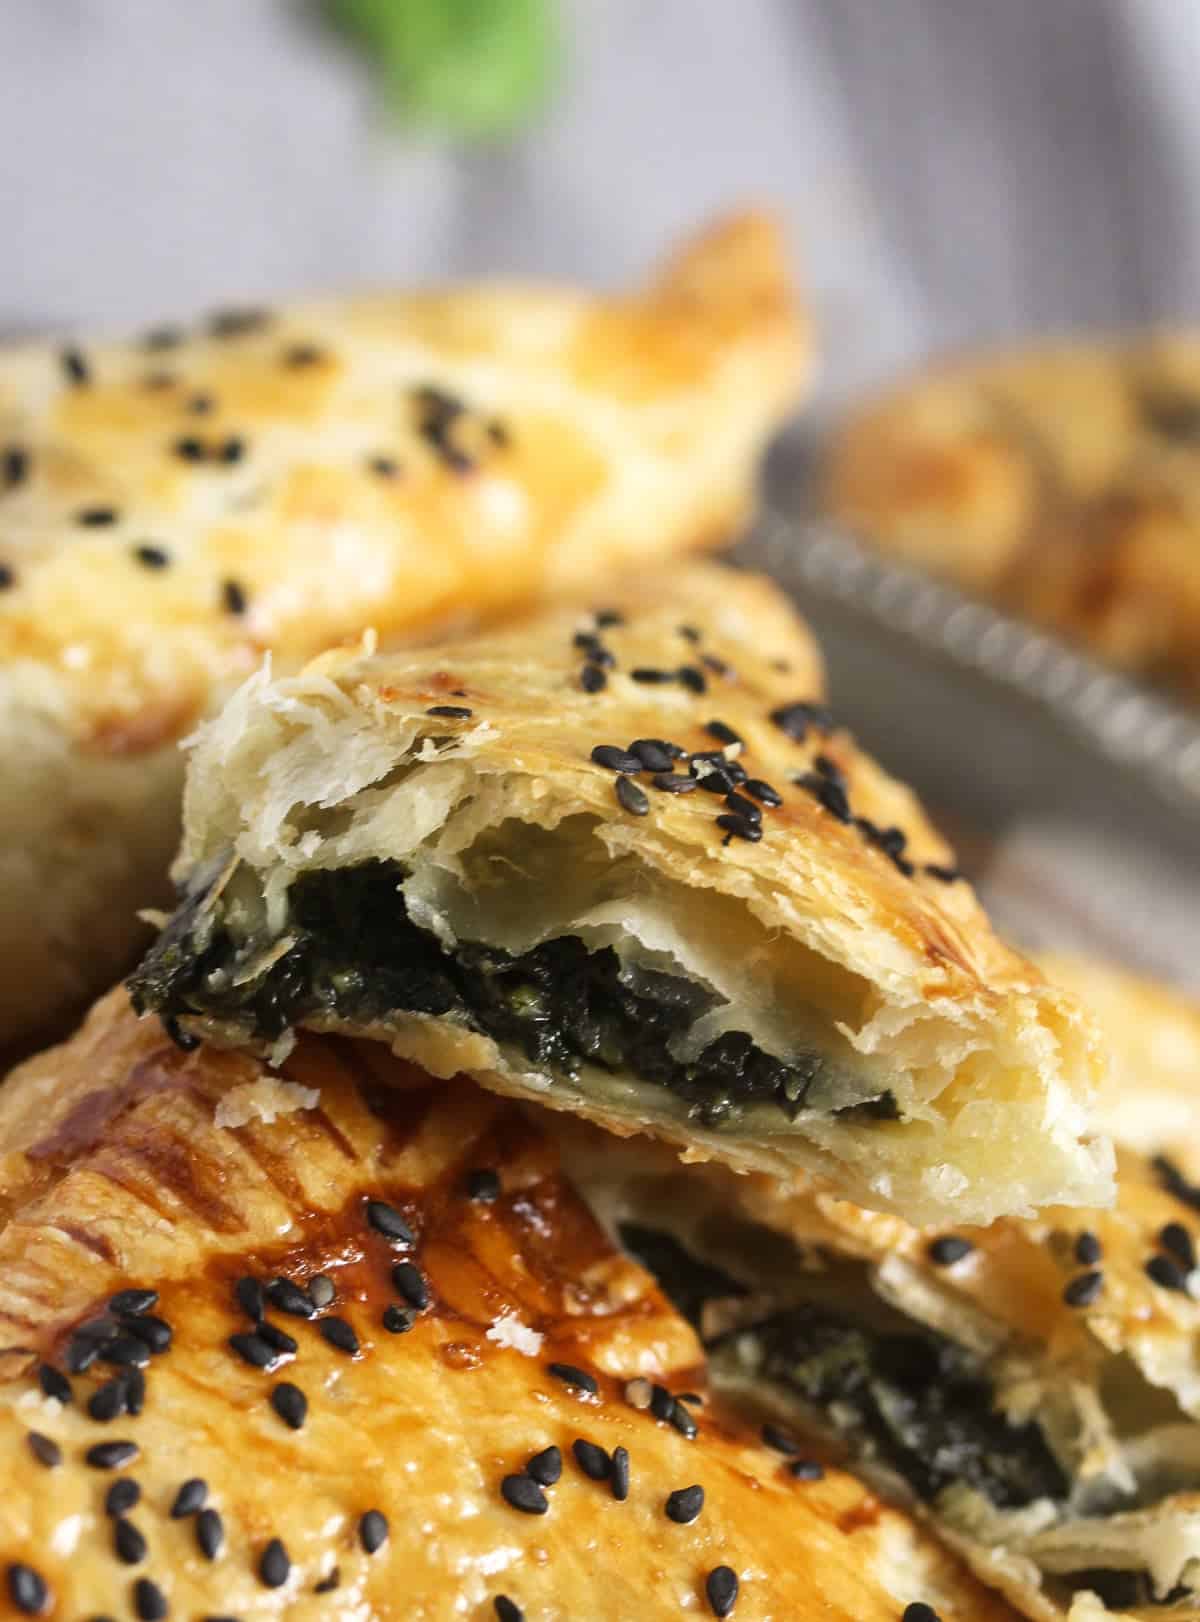 a mini spanakopita triangle sprinkled with black sesame seeds showing the filling.